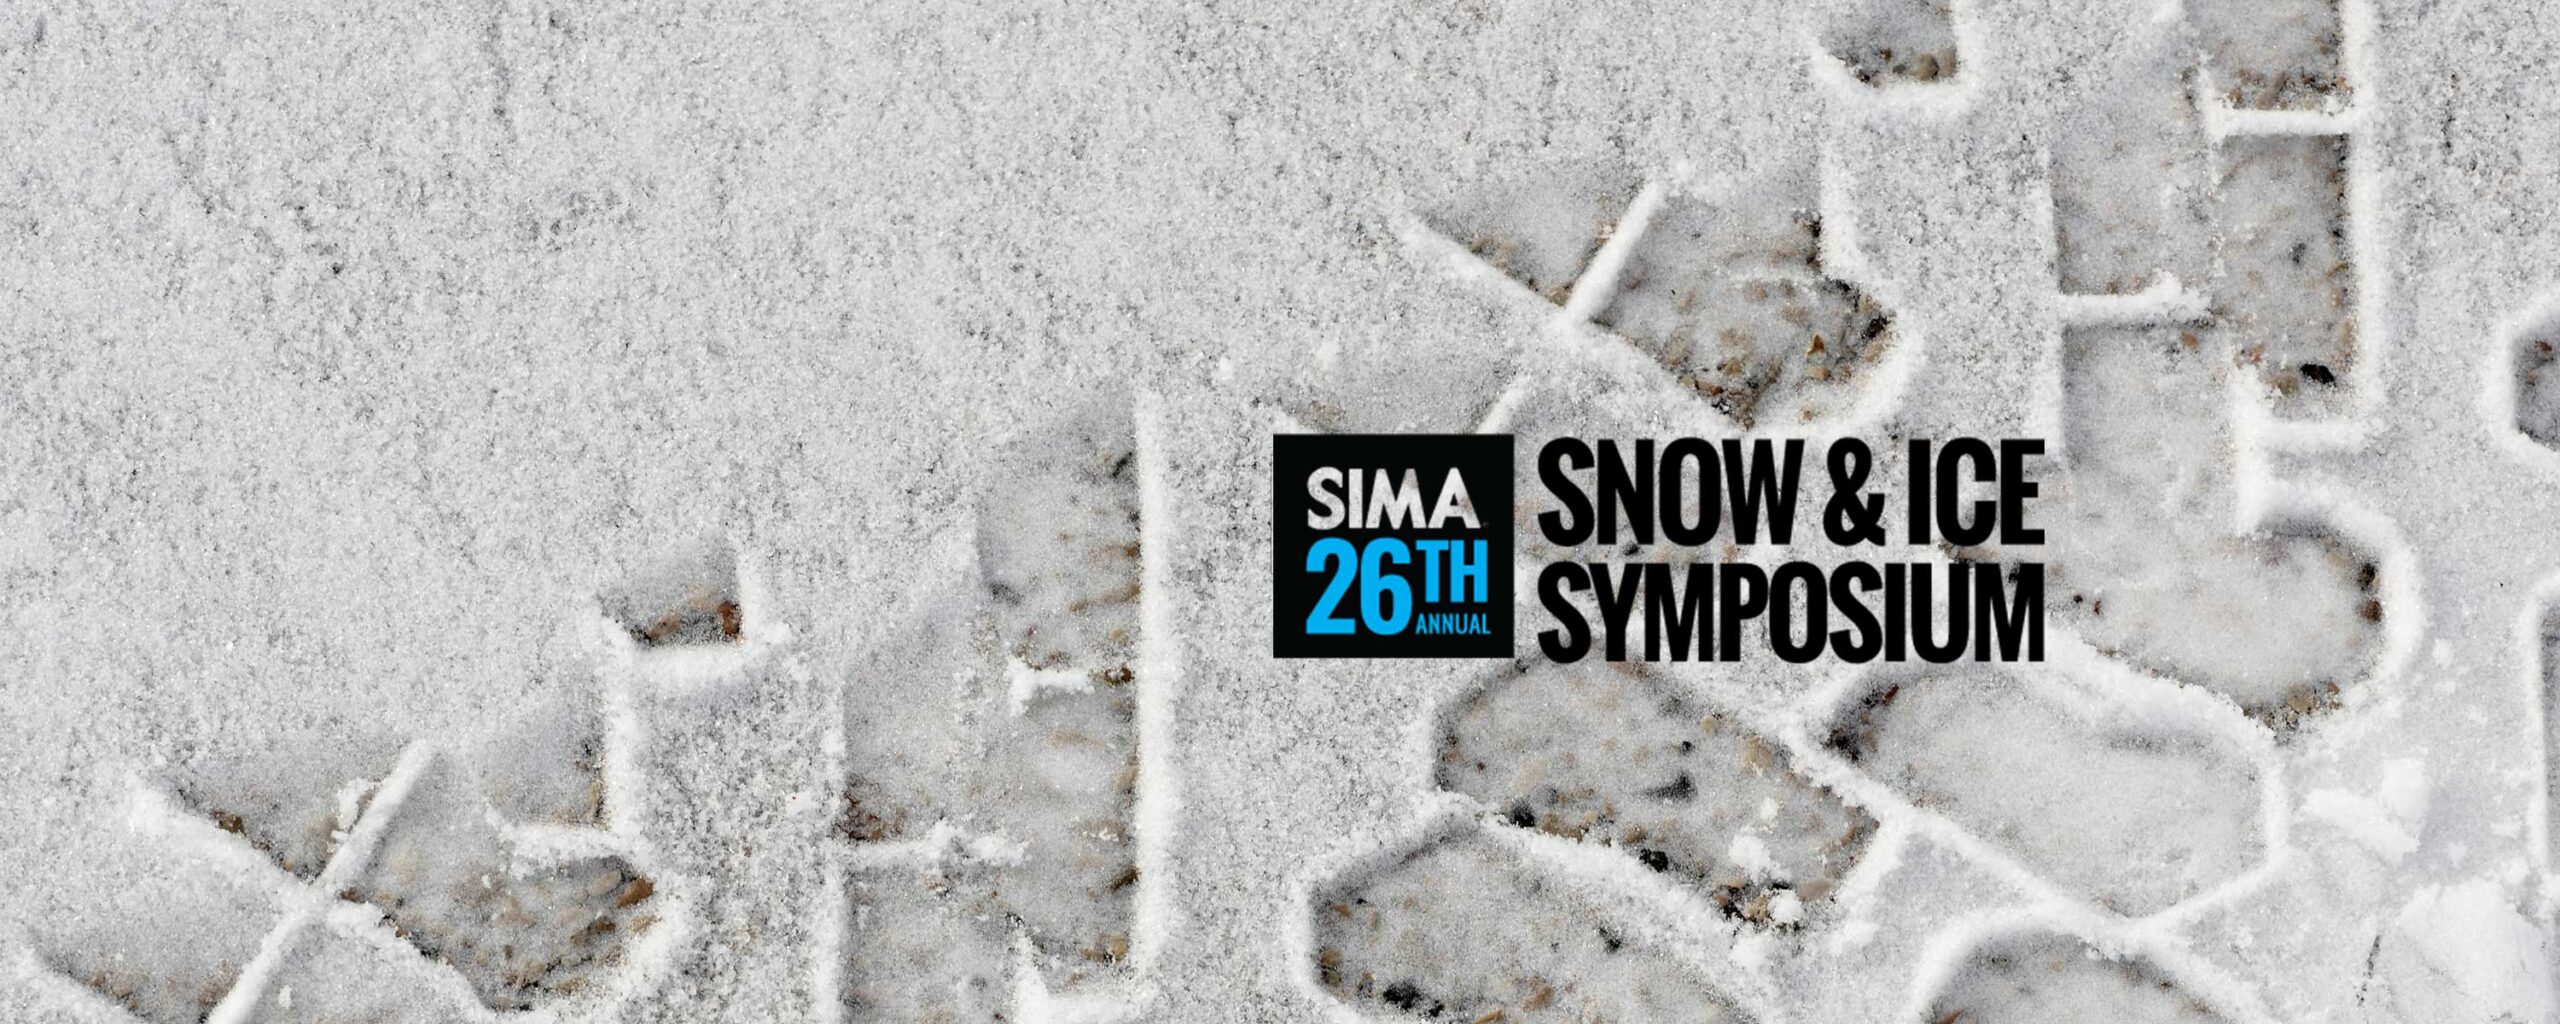 SIMA - home page event banner